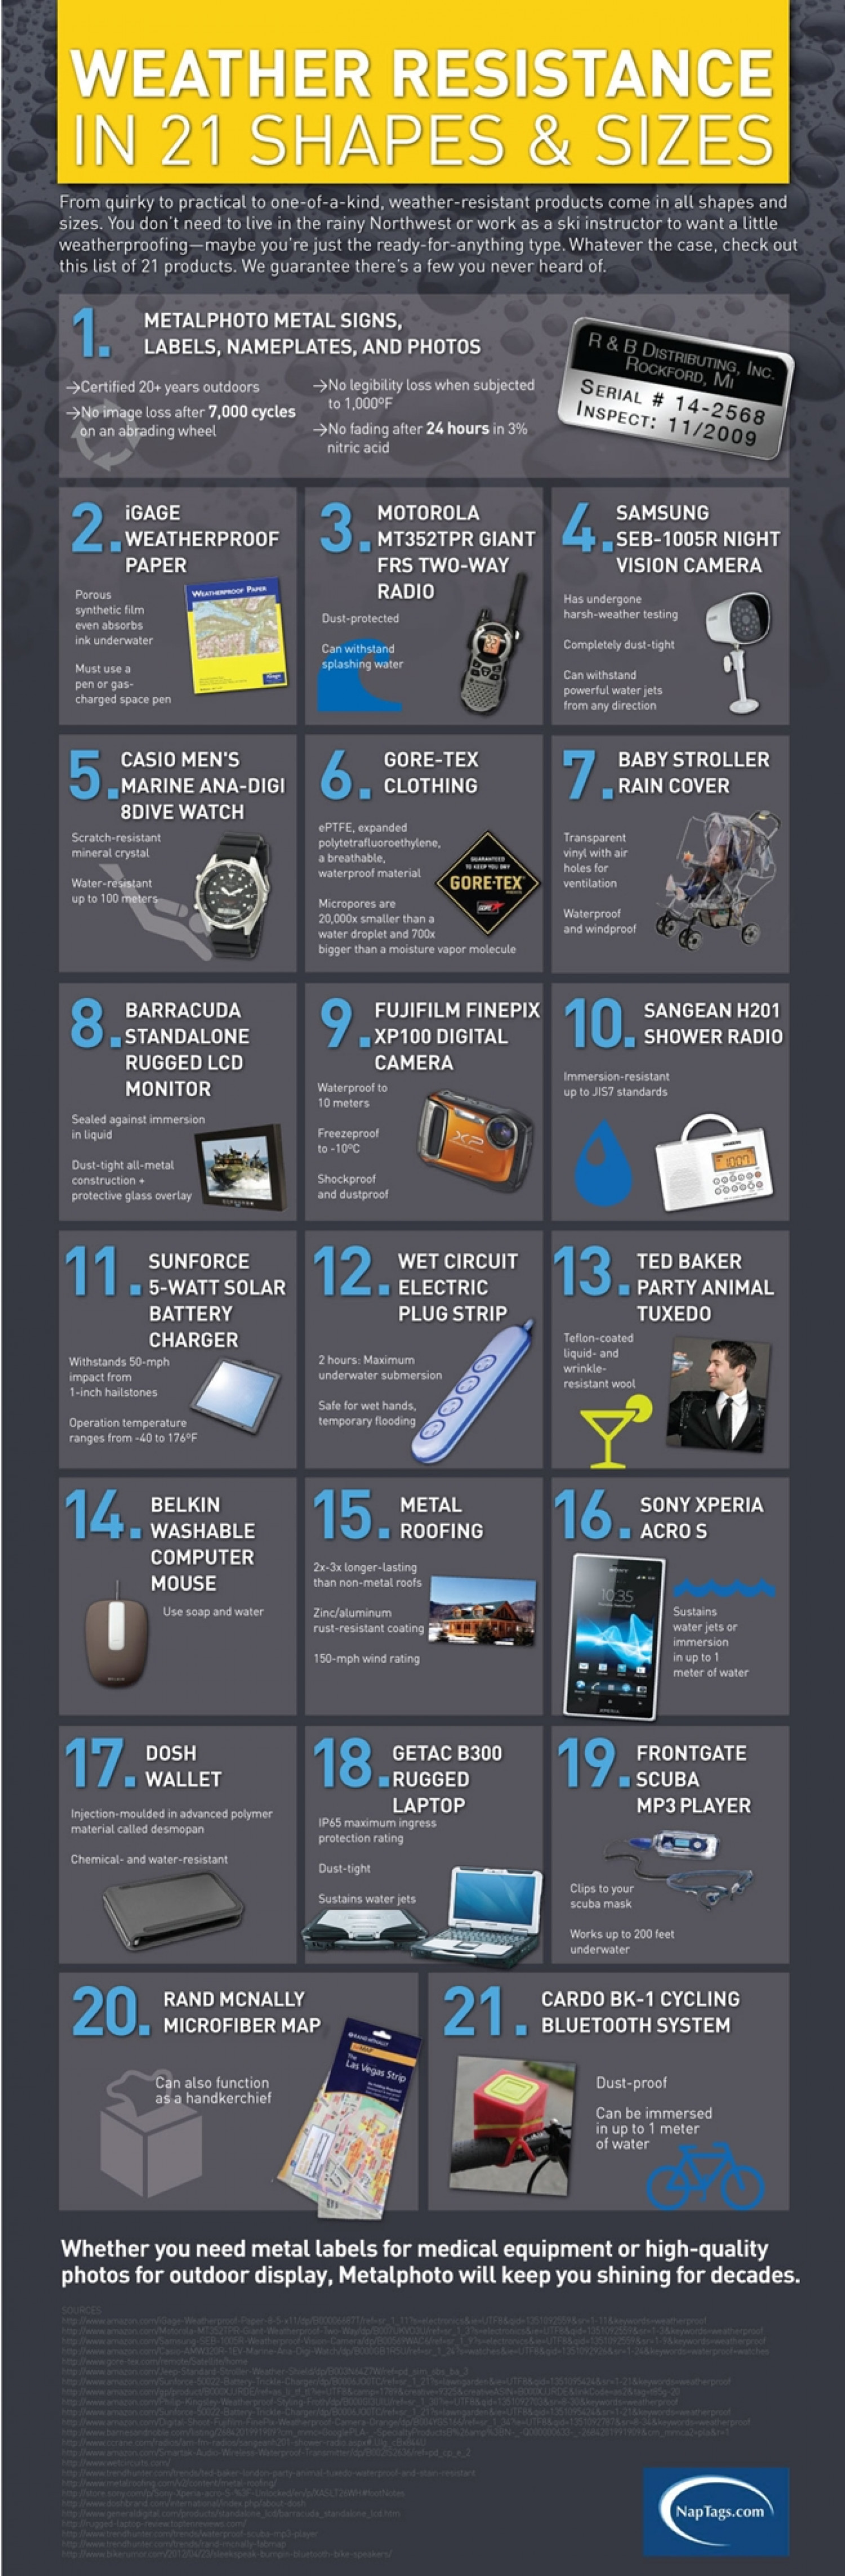 Top 21 Weatherproof Products Infographic